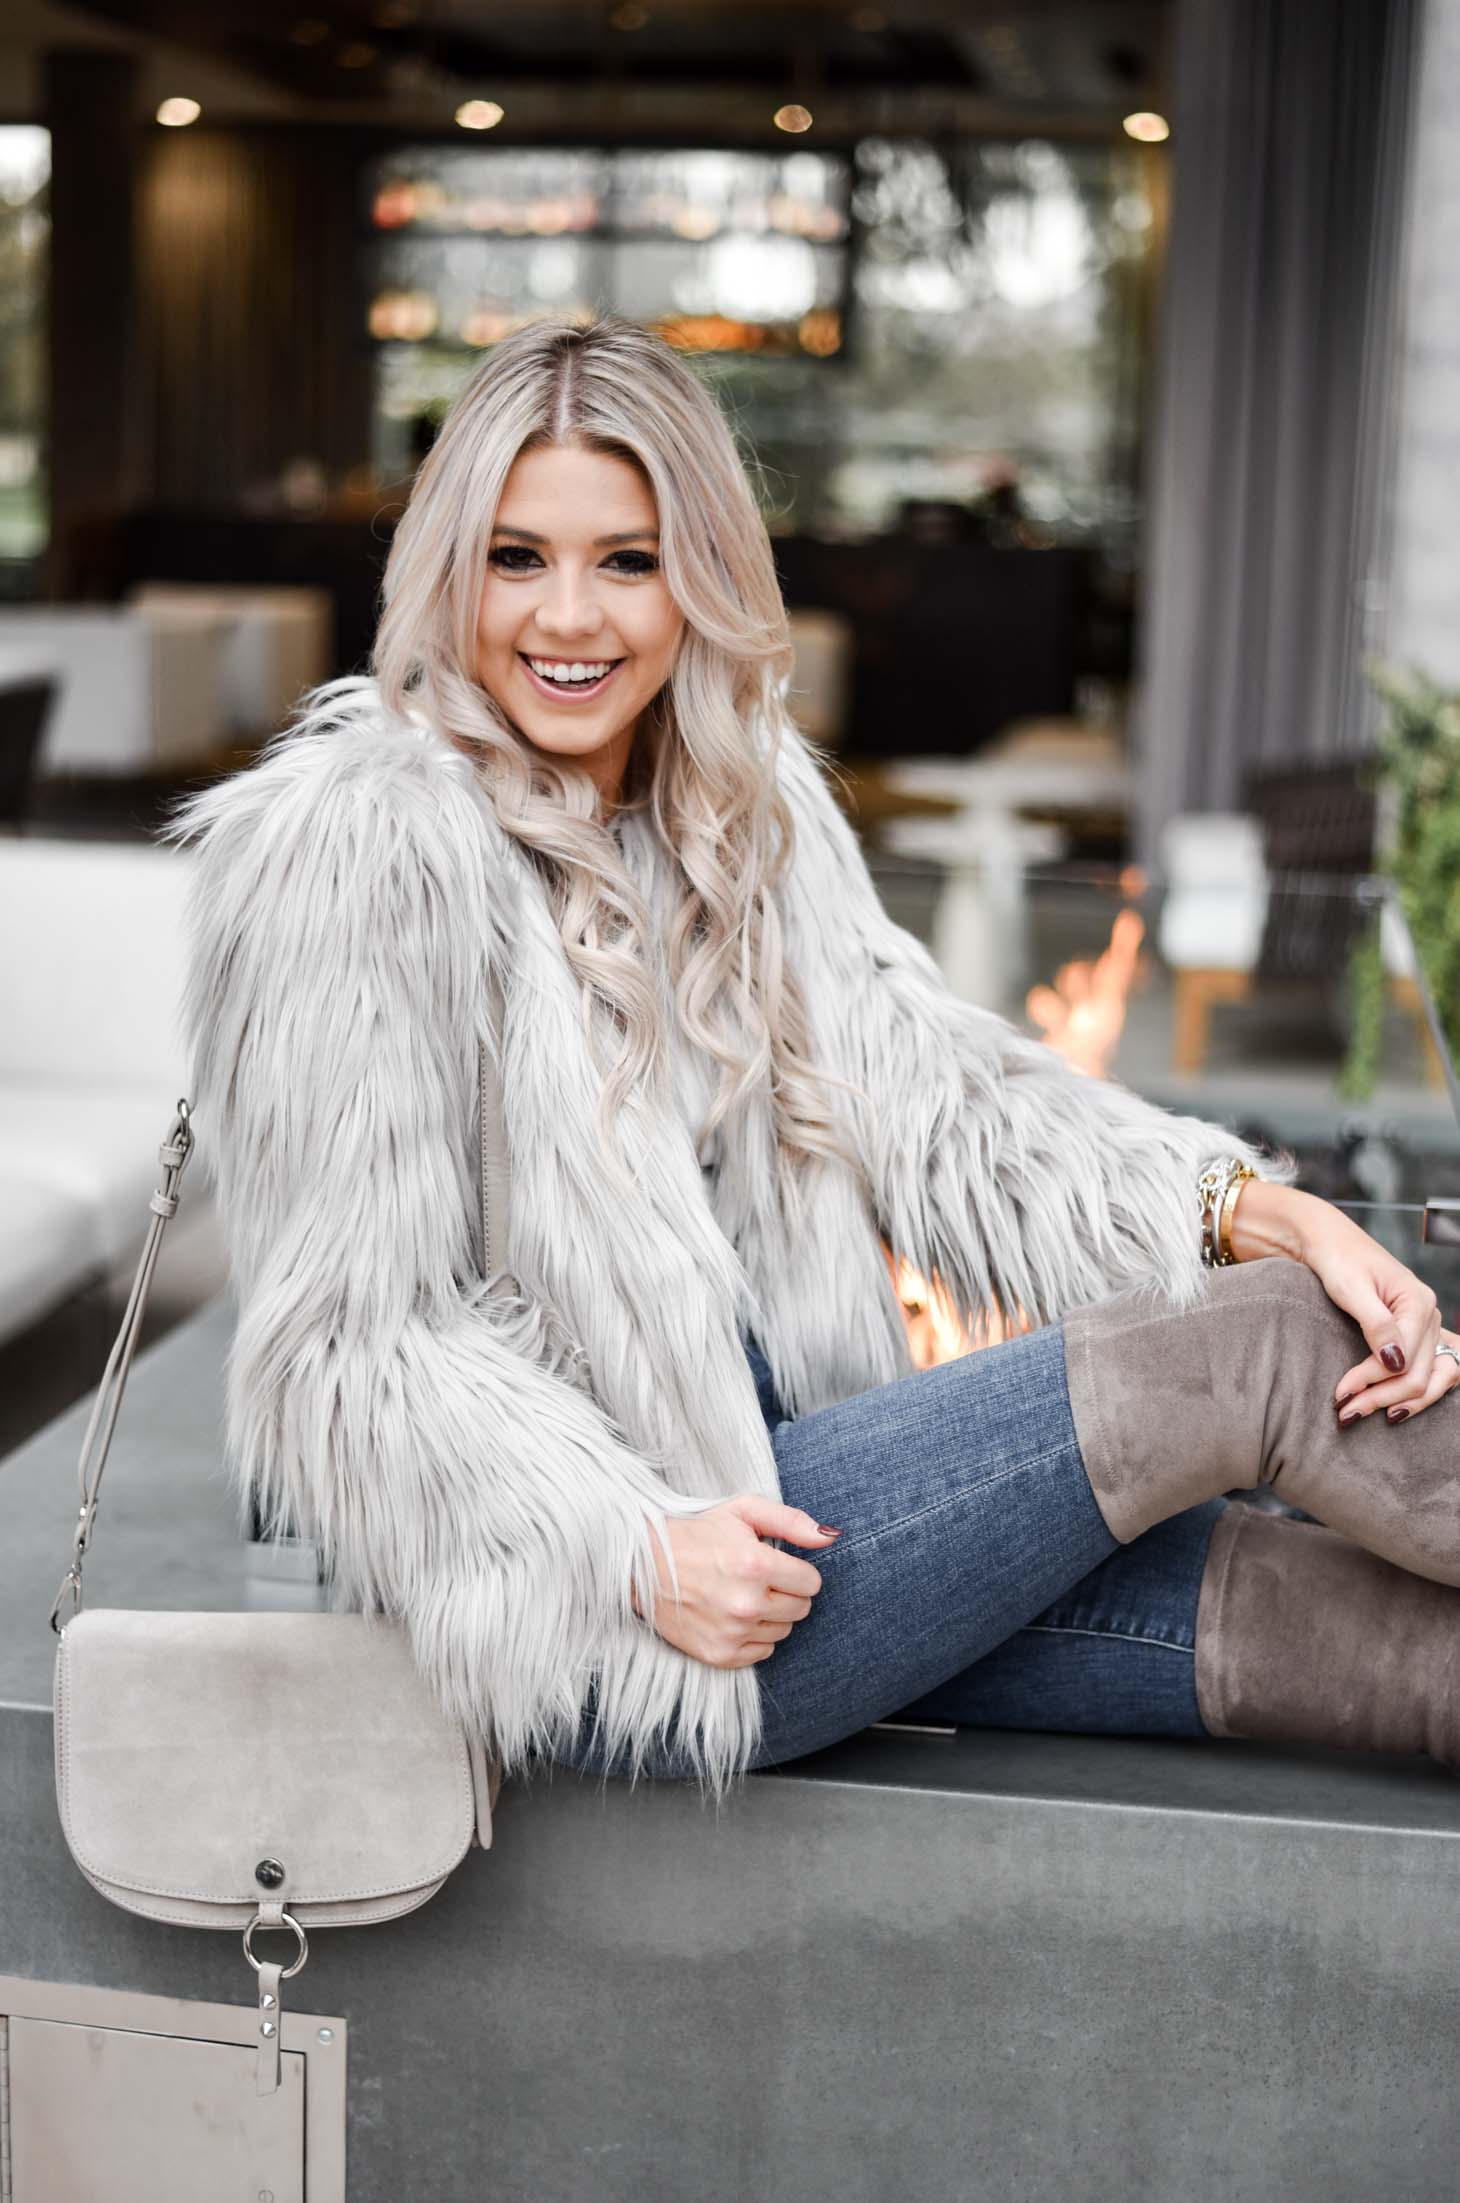 Erin Elizabeth of Wink and a Twirl shares the perfect faux fur jacket from Chicwish during her stay at AC Hotel Phoenix Biltmore in Phoenix, Arizona